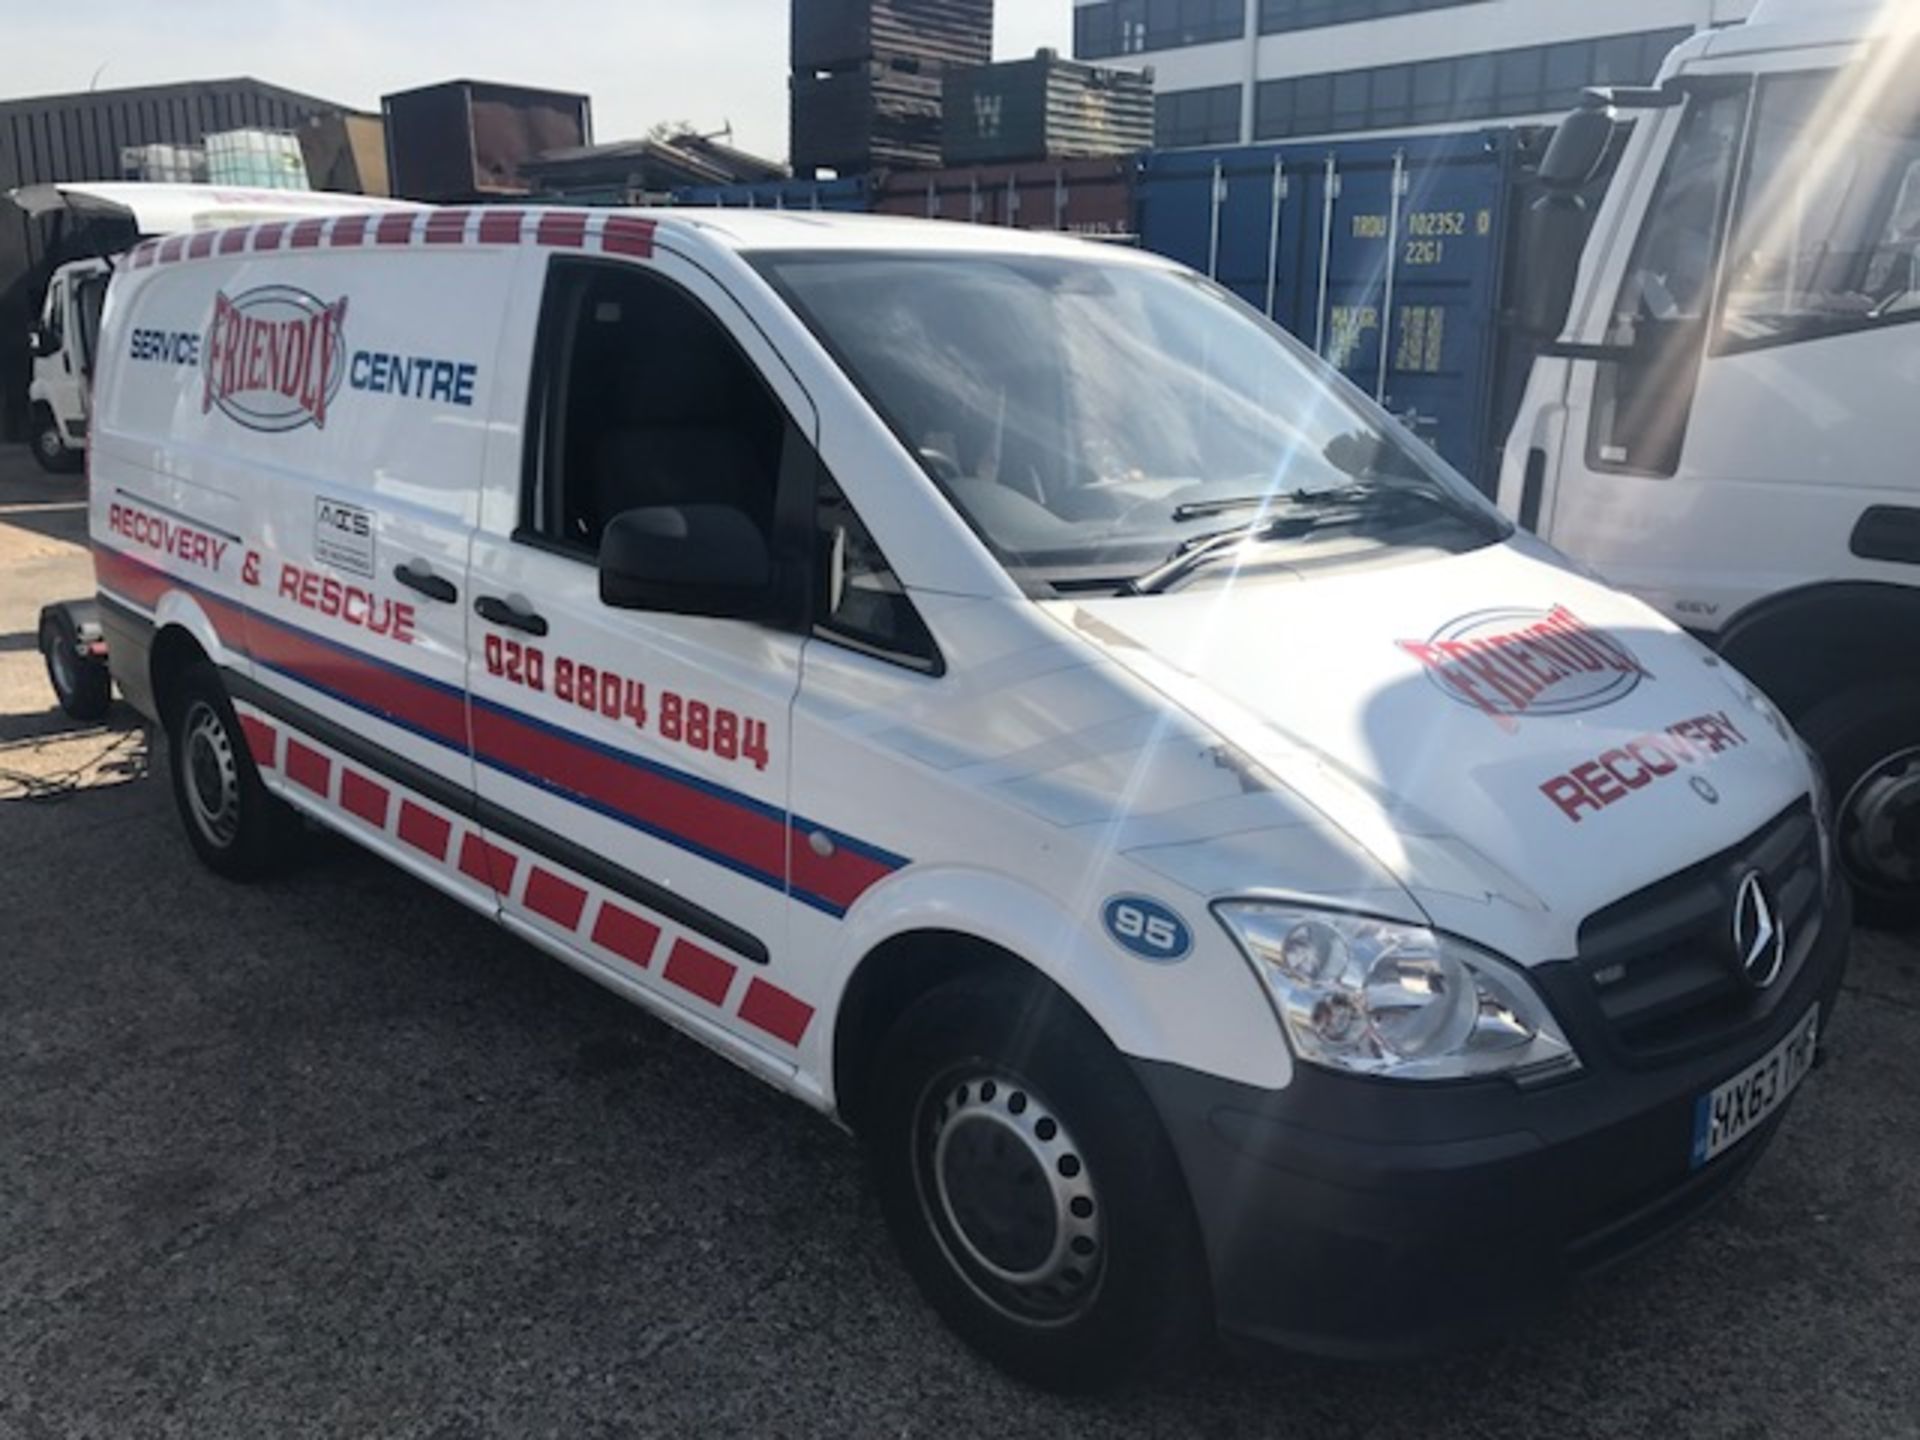 2013 Mercedes Vito 113 CDi recovering and rescue panel van complete with Intertrade Engineering